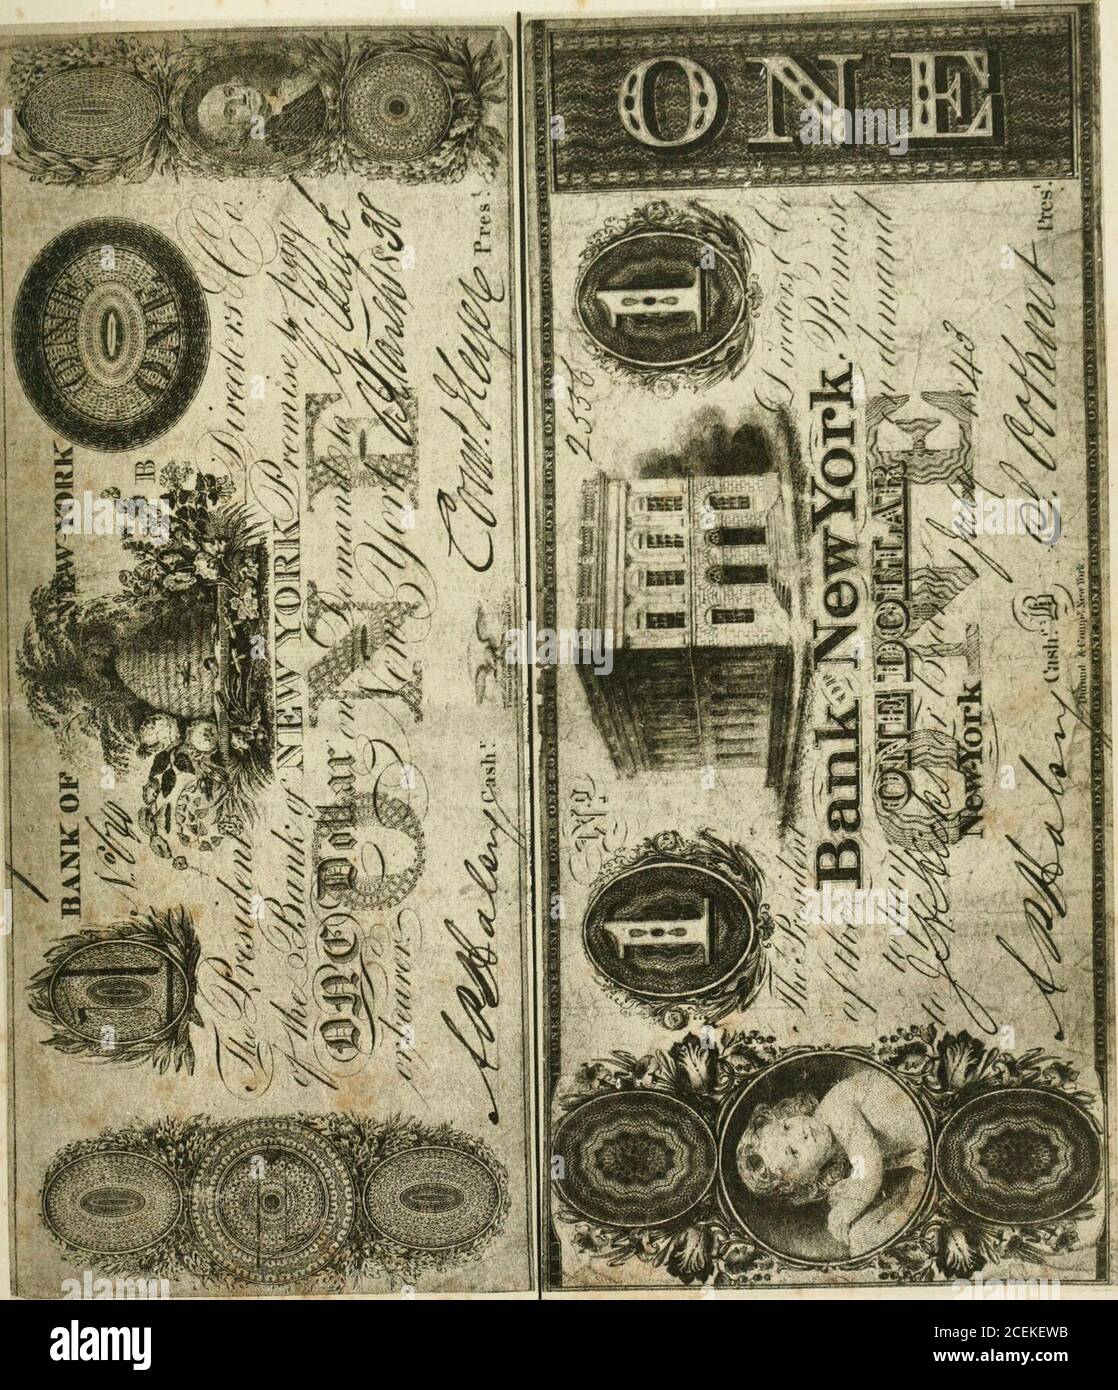 . A history of the Bank of New York, 1784-1884. they certi-fied checks as being due the depositor. This actioncreated distrust and made depositors more anxious toreceive gold for their checks. A crowd filled the banking-room of the Bank ofNew York, and as it became evident that gold wasbeing drawn on checks which should properly havegone through the Clearing-House, it was decided, atabout 2 P.M., to refuse payment of any checks or billsnot presented by a dealer in the bank. On the 13th of October, during the run on thebanks a person presented two one-hundred-dollar notesof the bank to the payi Stock Photo